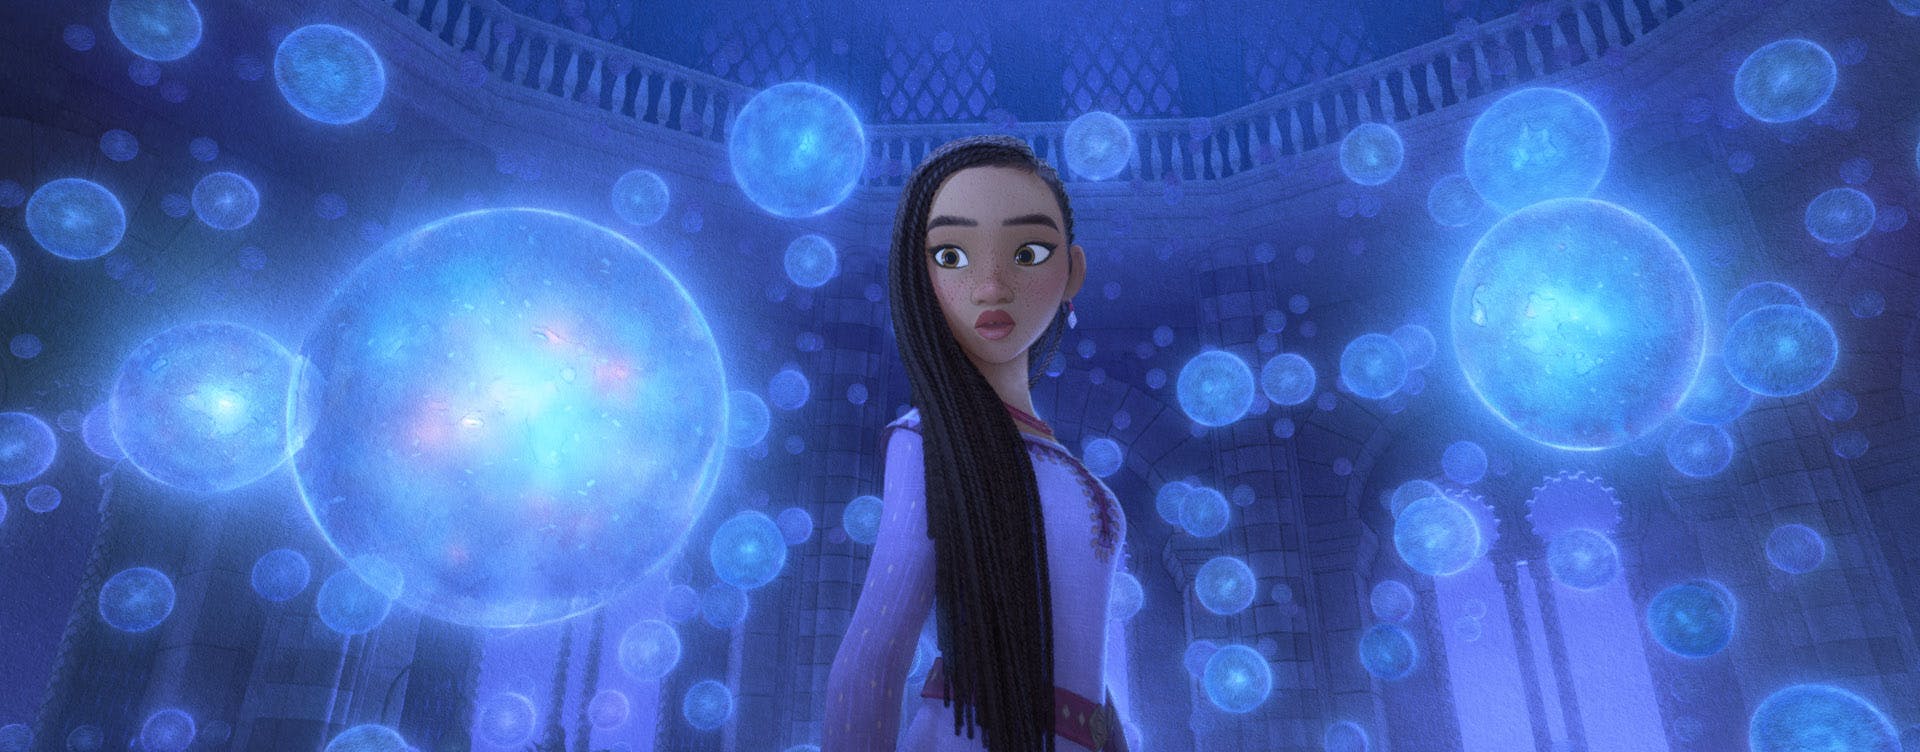 WISHES DO COME TRUE – In Walt Disney Animation Studios’ “Wish,” Asha (voice of Ariana DeBose) is a sharp-witted idealist who lives in Rosas—a kingdom where wishes really do come true. Helmed by Oscar®-winning director Chris Buck and Fawn Veerasunthorn, “Wish” features original songs by Grammy®-nominated singer/songwriter Julia Michaels and Grammy-winning producer, songwriter and musician Benjamin Rice. The epic animated musical opens only in theaters on Nov. 22, 2023. © 2023 Disney. All Rights Reserved.